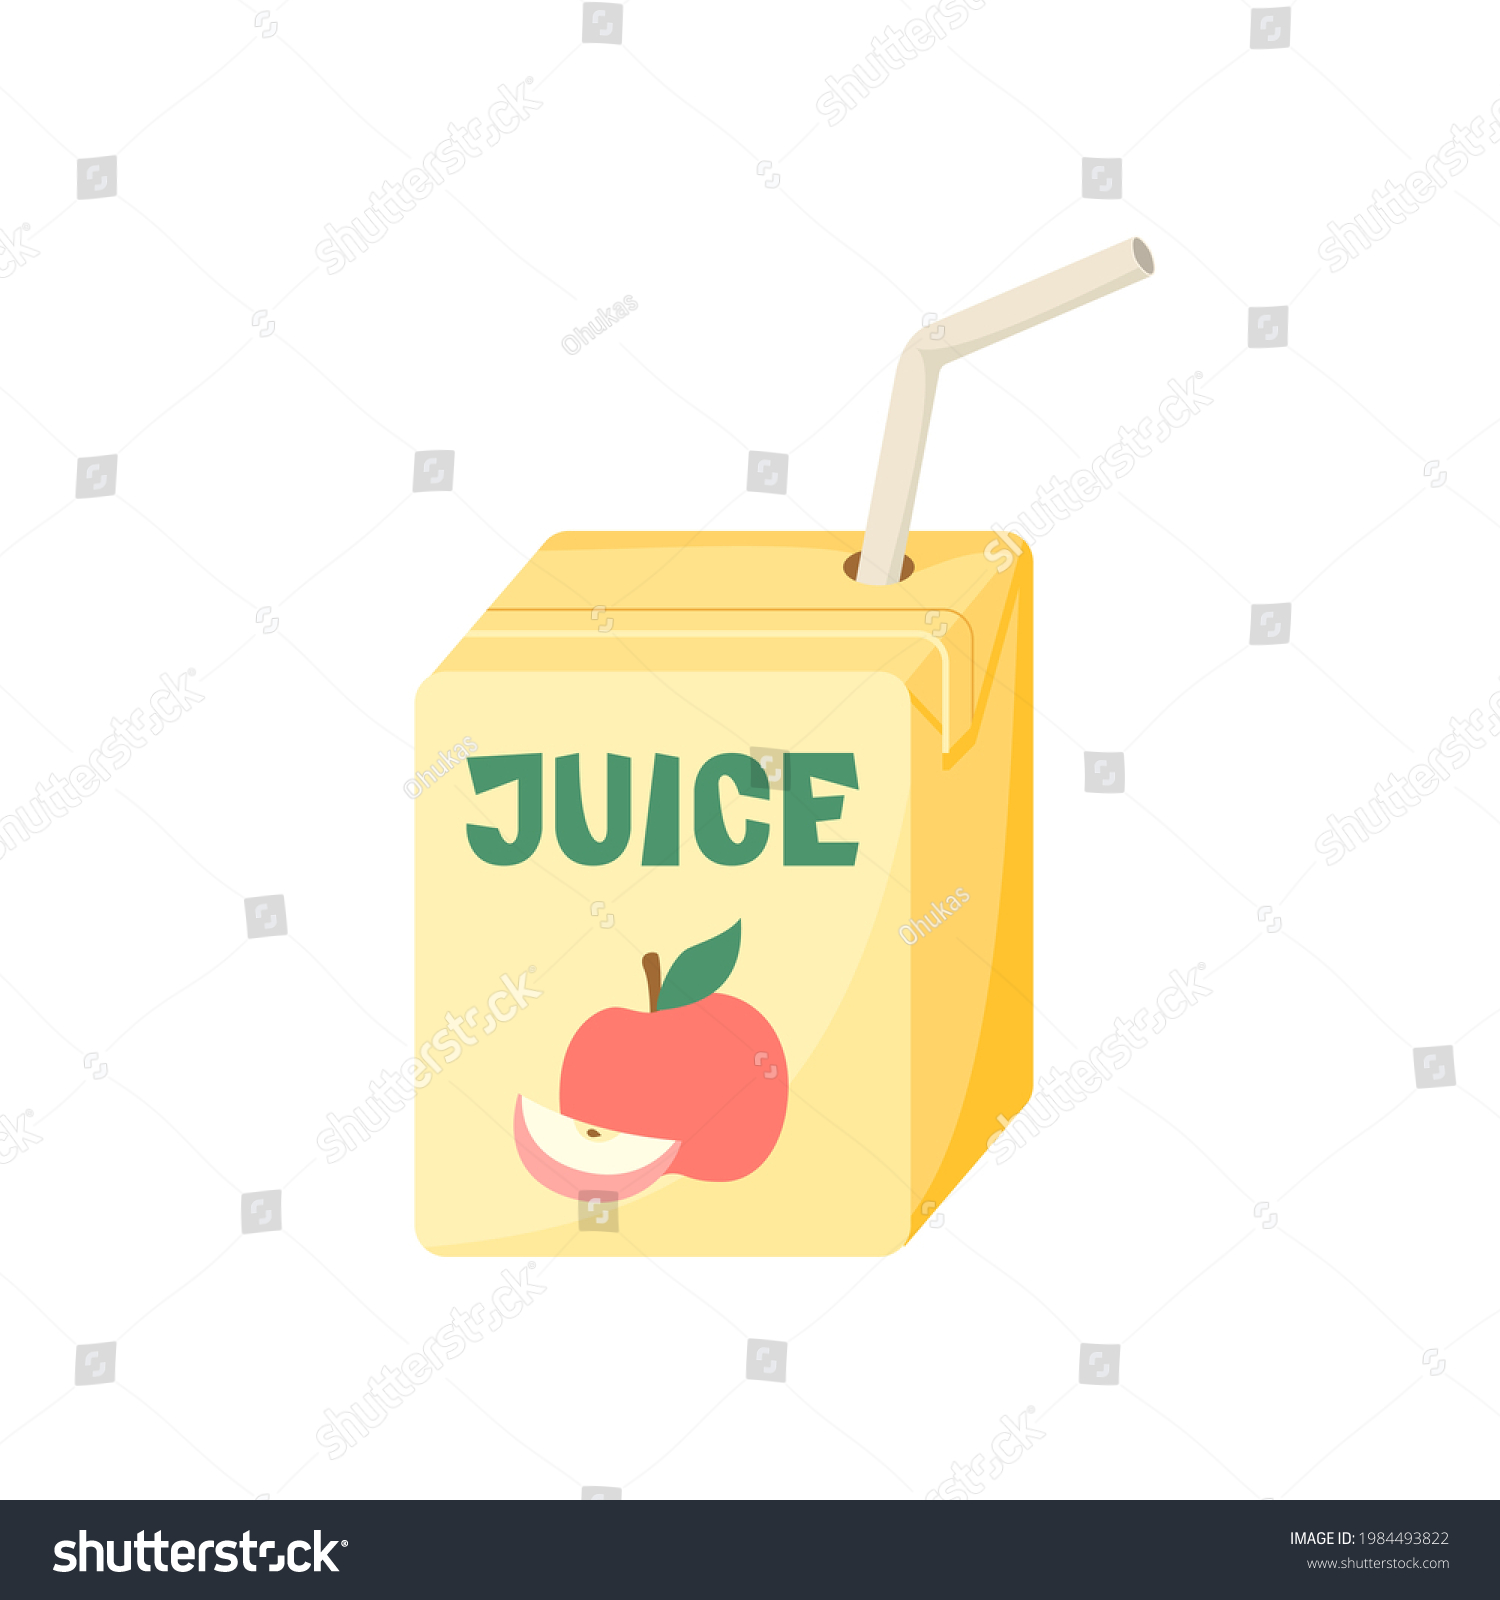 SVG of Box of apple juice with a tube, it shows an apple and the word juice. Vector illustration in a flat style, isolated on a white background. svg